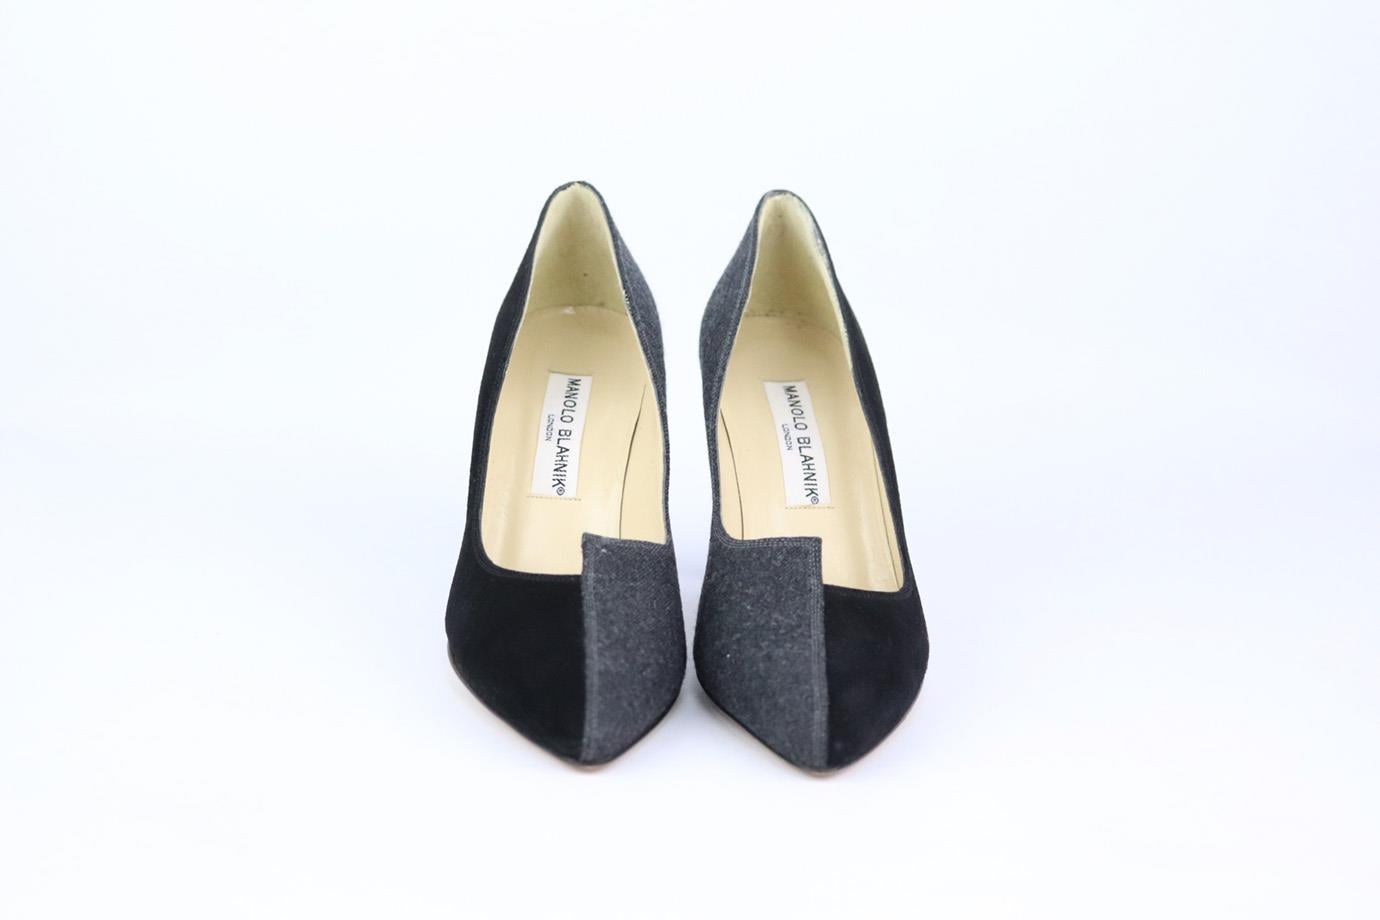 These pumps by Manolo Blahnik are a classic style that will never date, made in Italy from supple black and grey leather, they have pointed toes and comfortable 76 mm heels to take you from morning meetings to dinner with friends. Heel measures